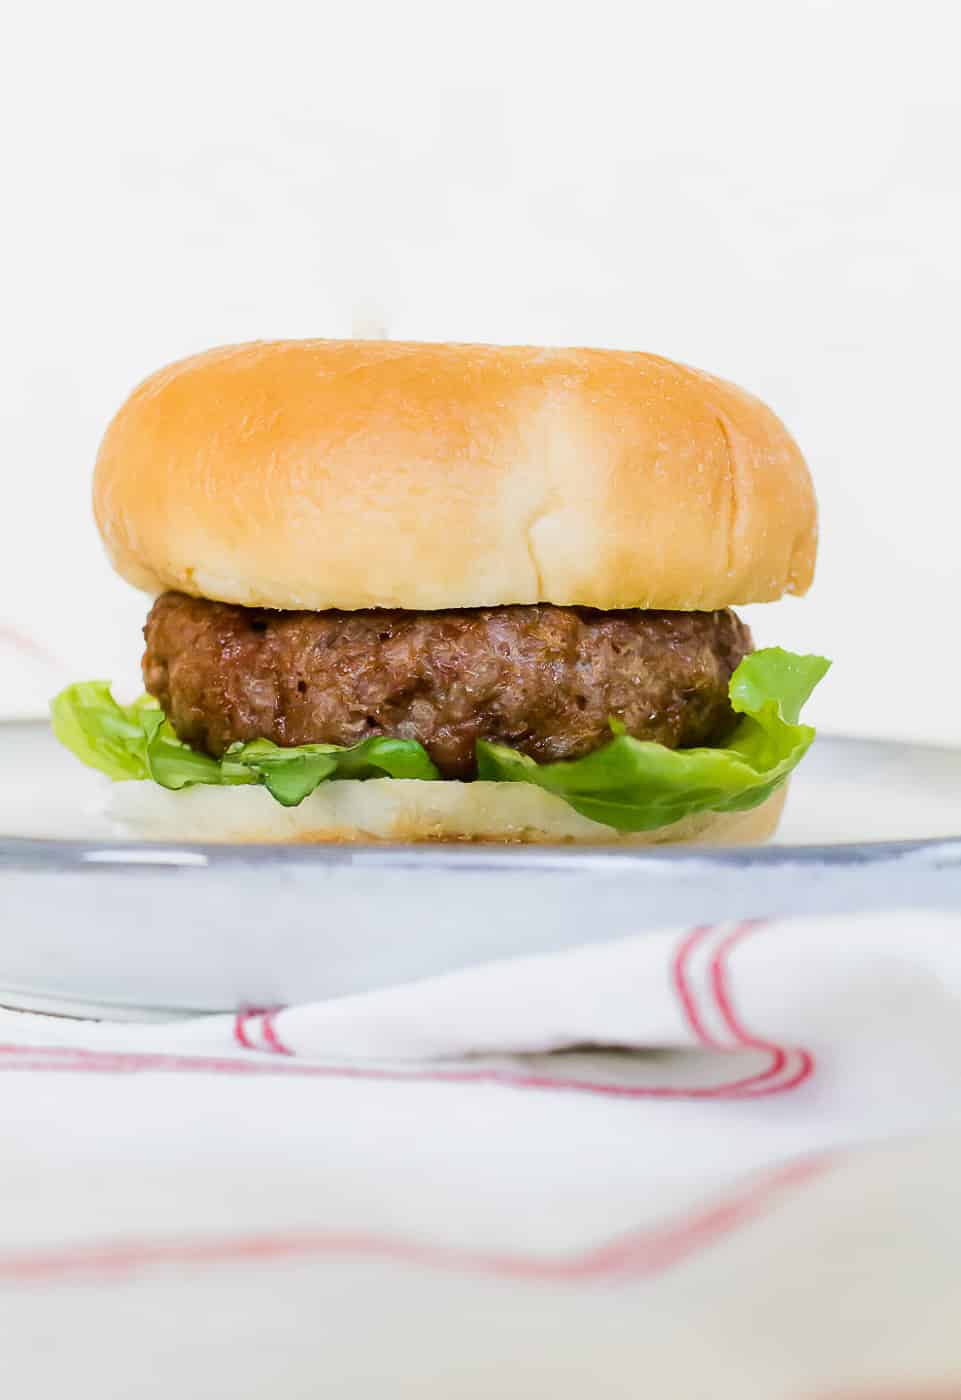 A thick cooked hamburger on a fluffy looking hamburger bun with a piece of green leafy lettuce